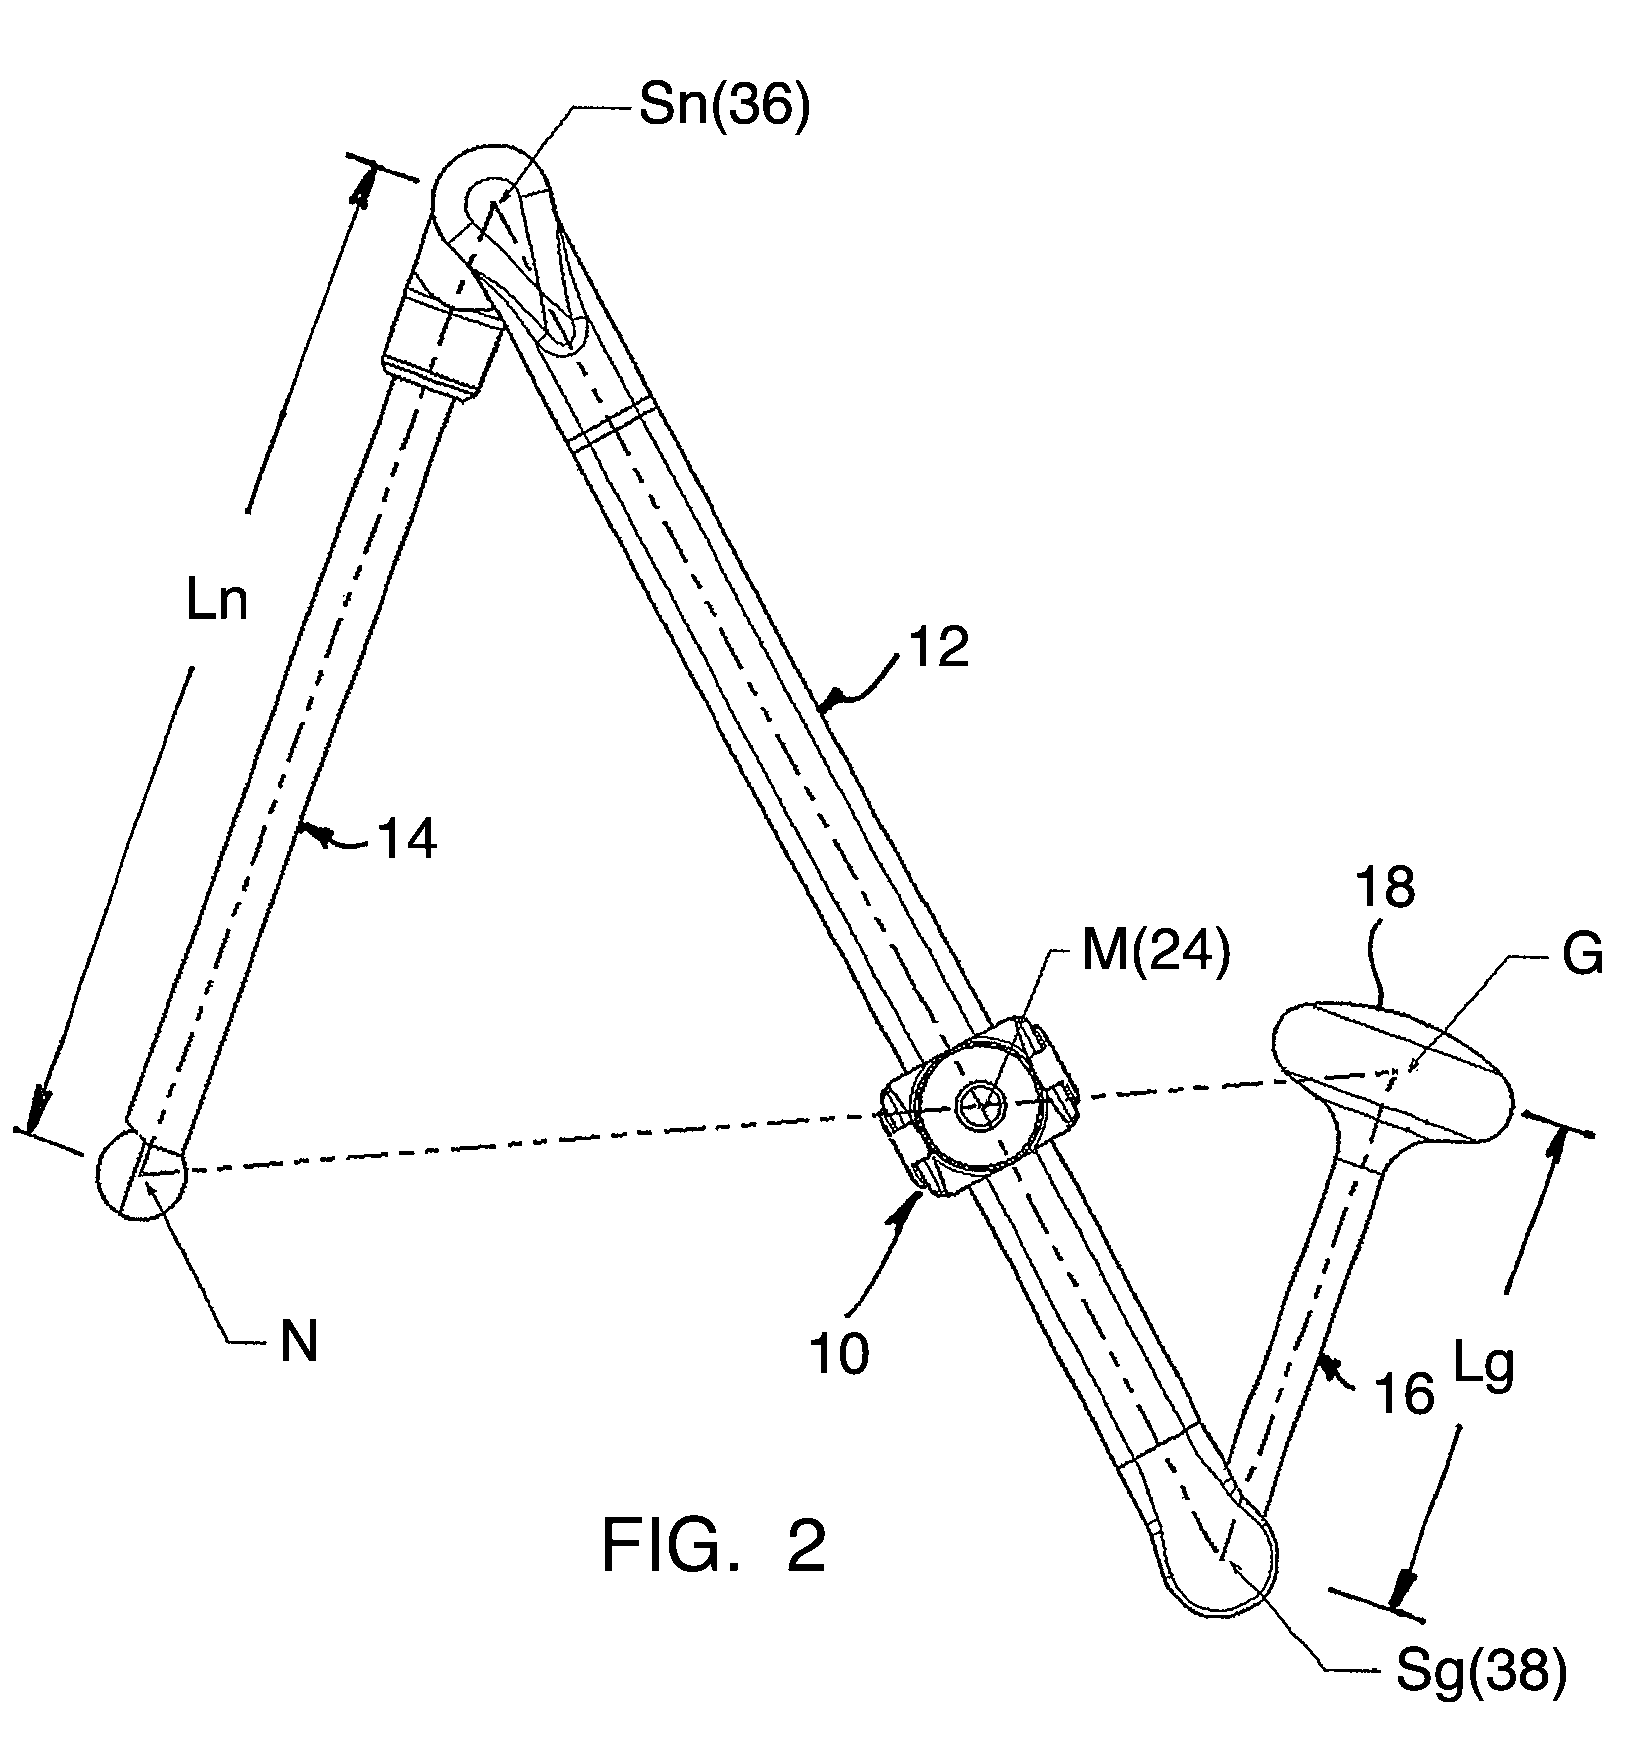 Support for the holding and positioning of a utility load in space